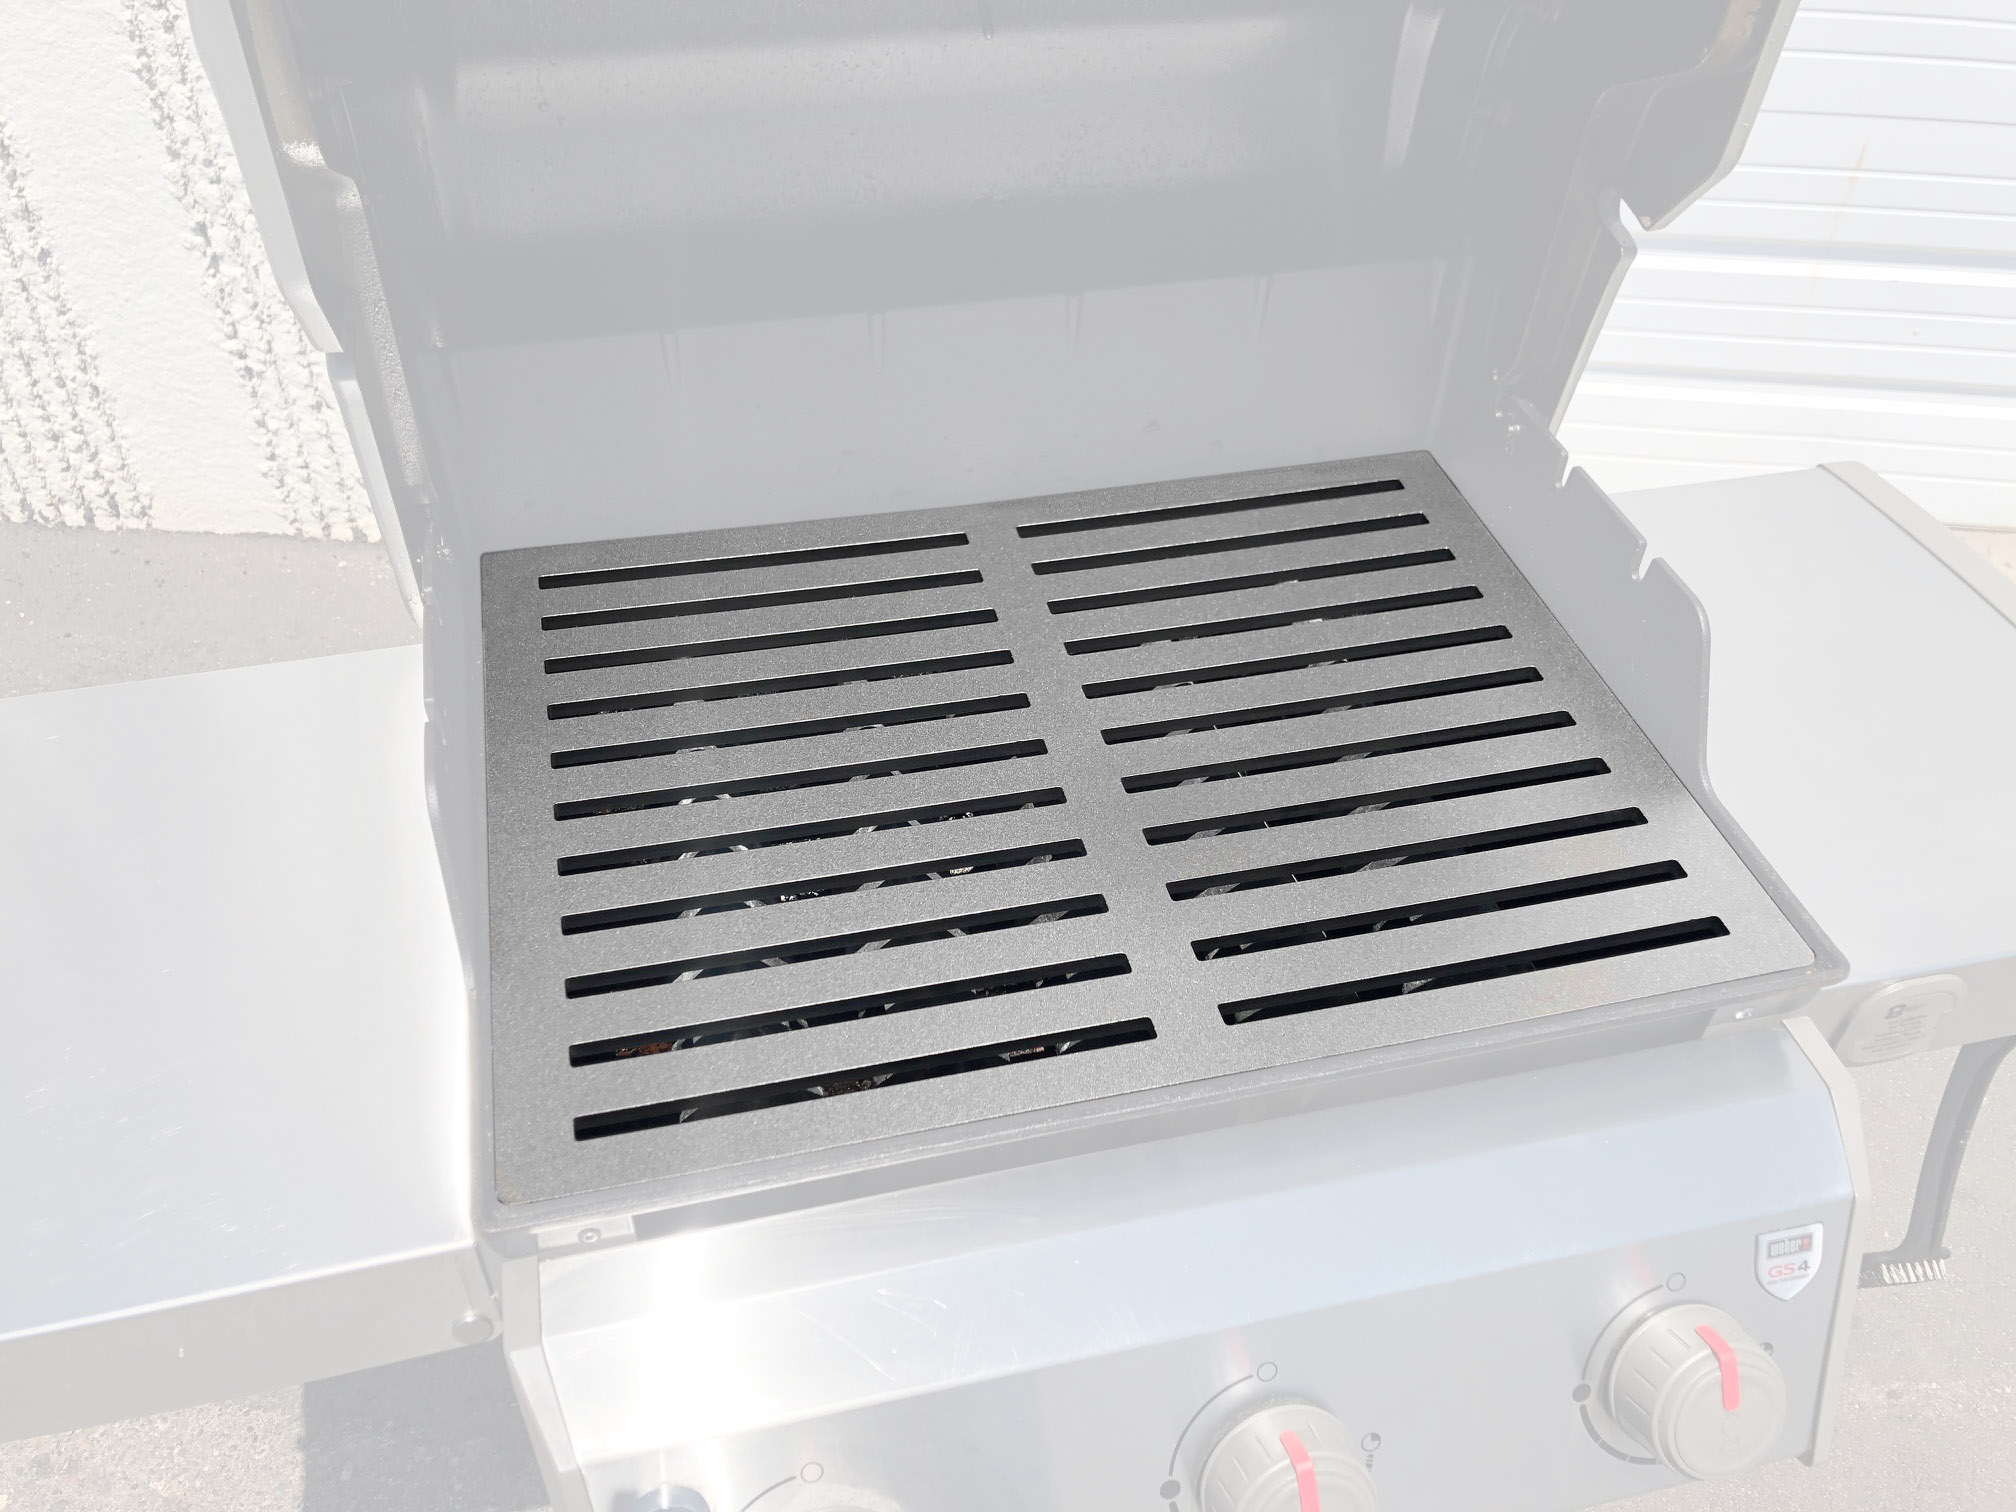 GrillGrate Review: An Upgrade Most Gas Grills Need